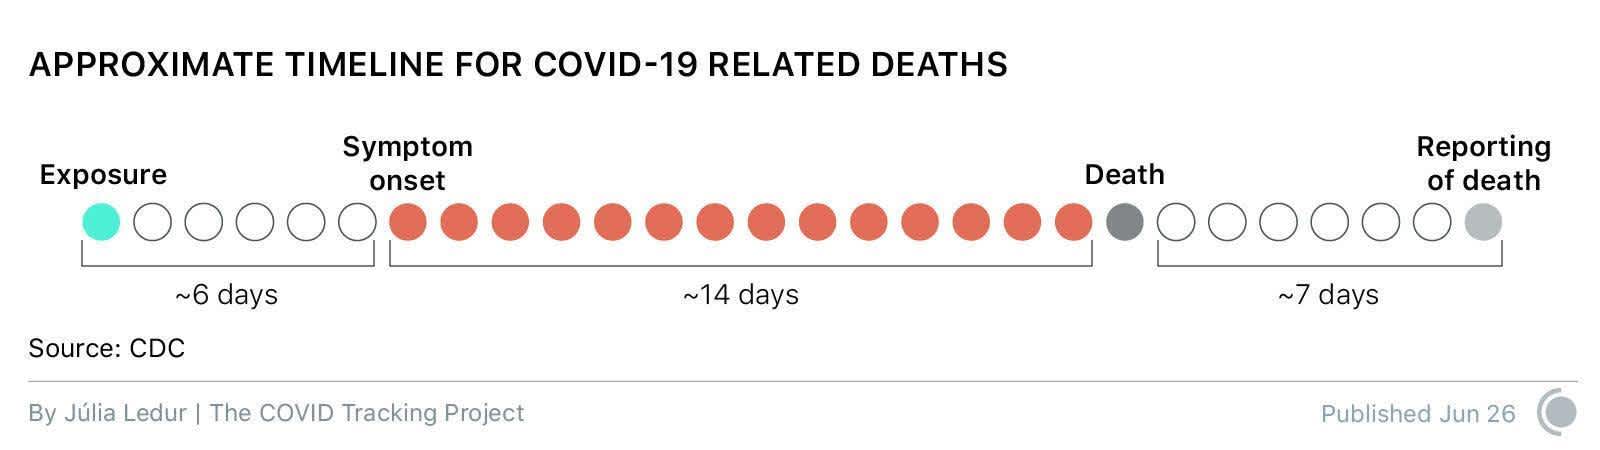 Approximate timeline for COVID-19 related deaths, from exposure to symptom onset to death to reporting on the death.